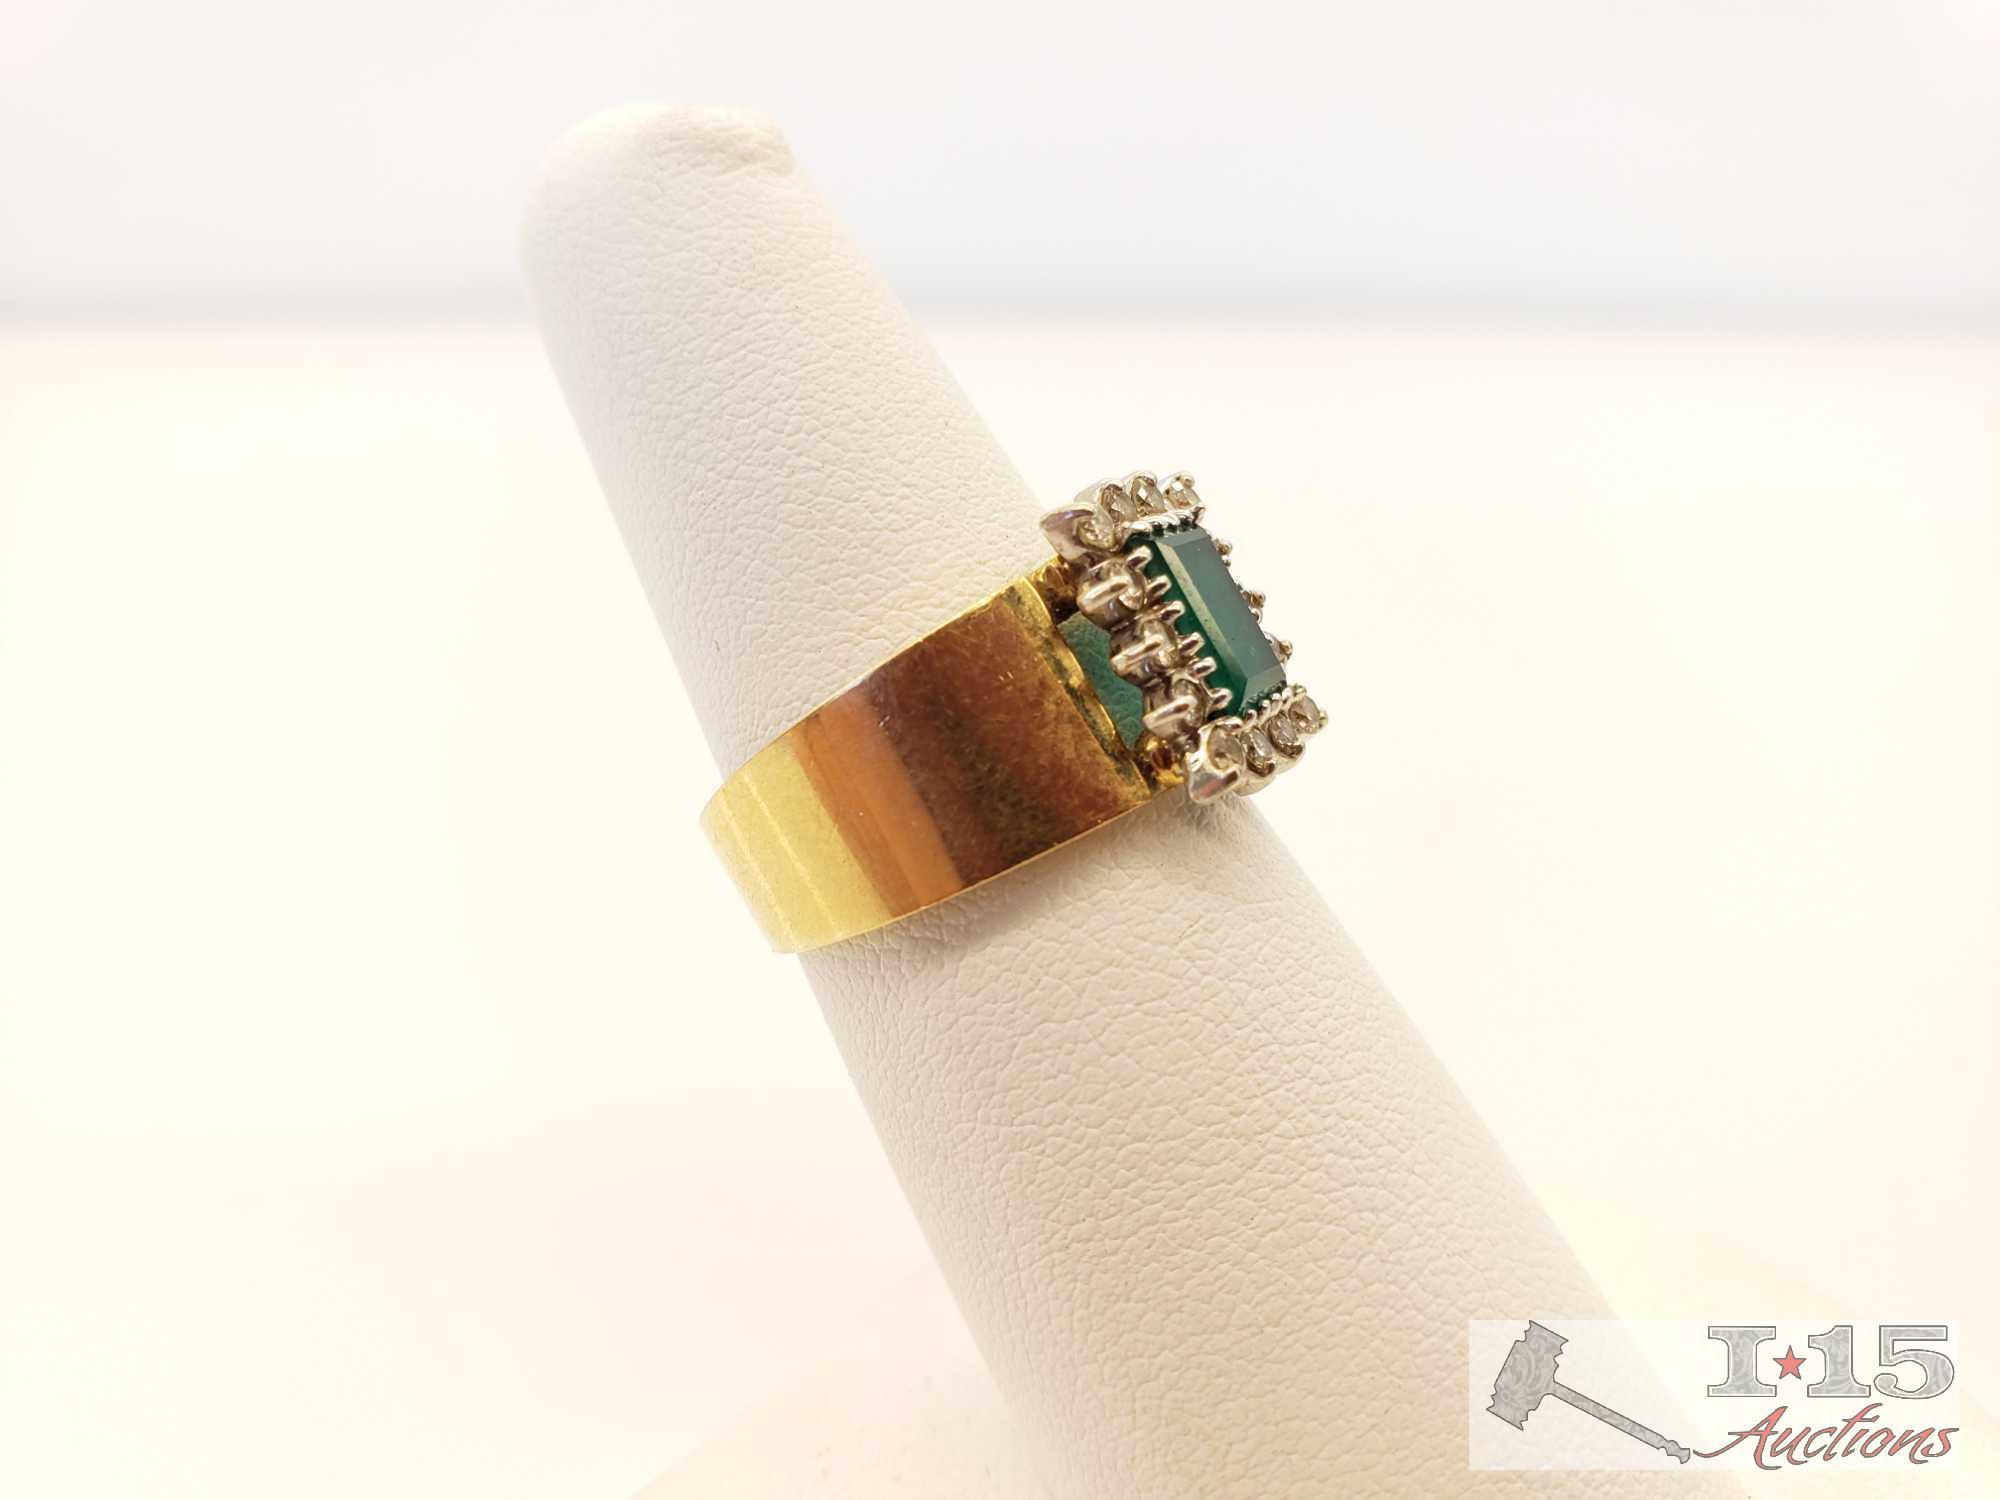 14k Gold Ring and Earring set with Emeralds and Diamonds